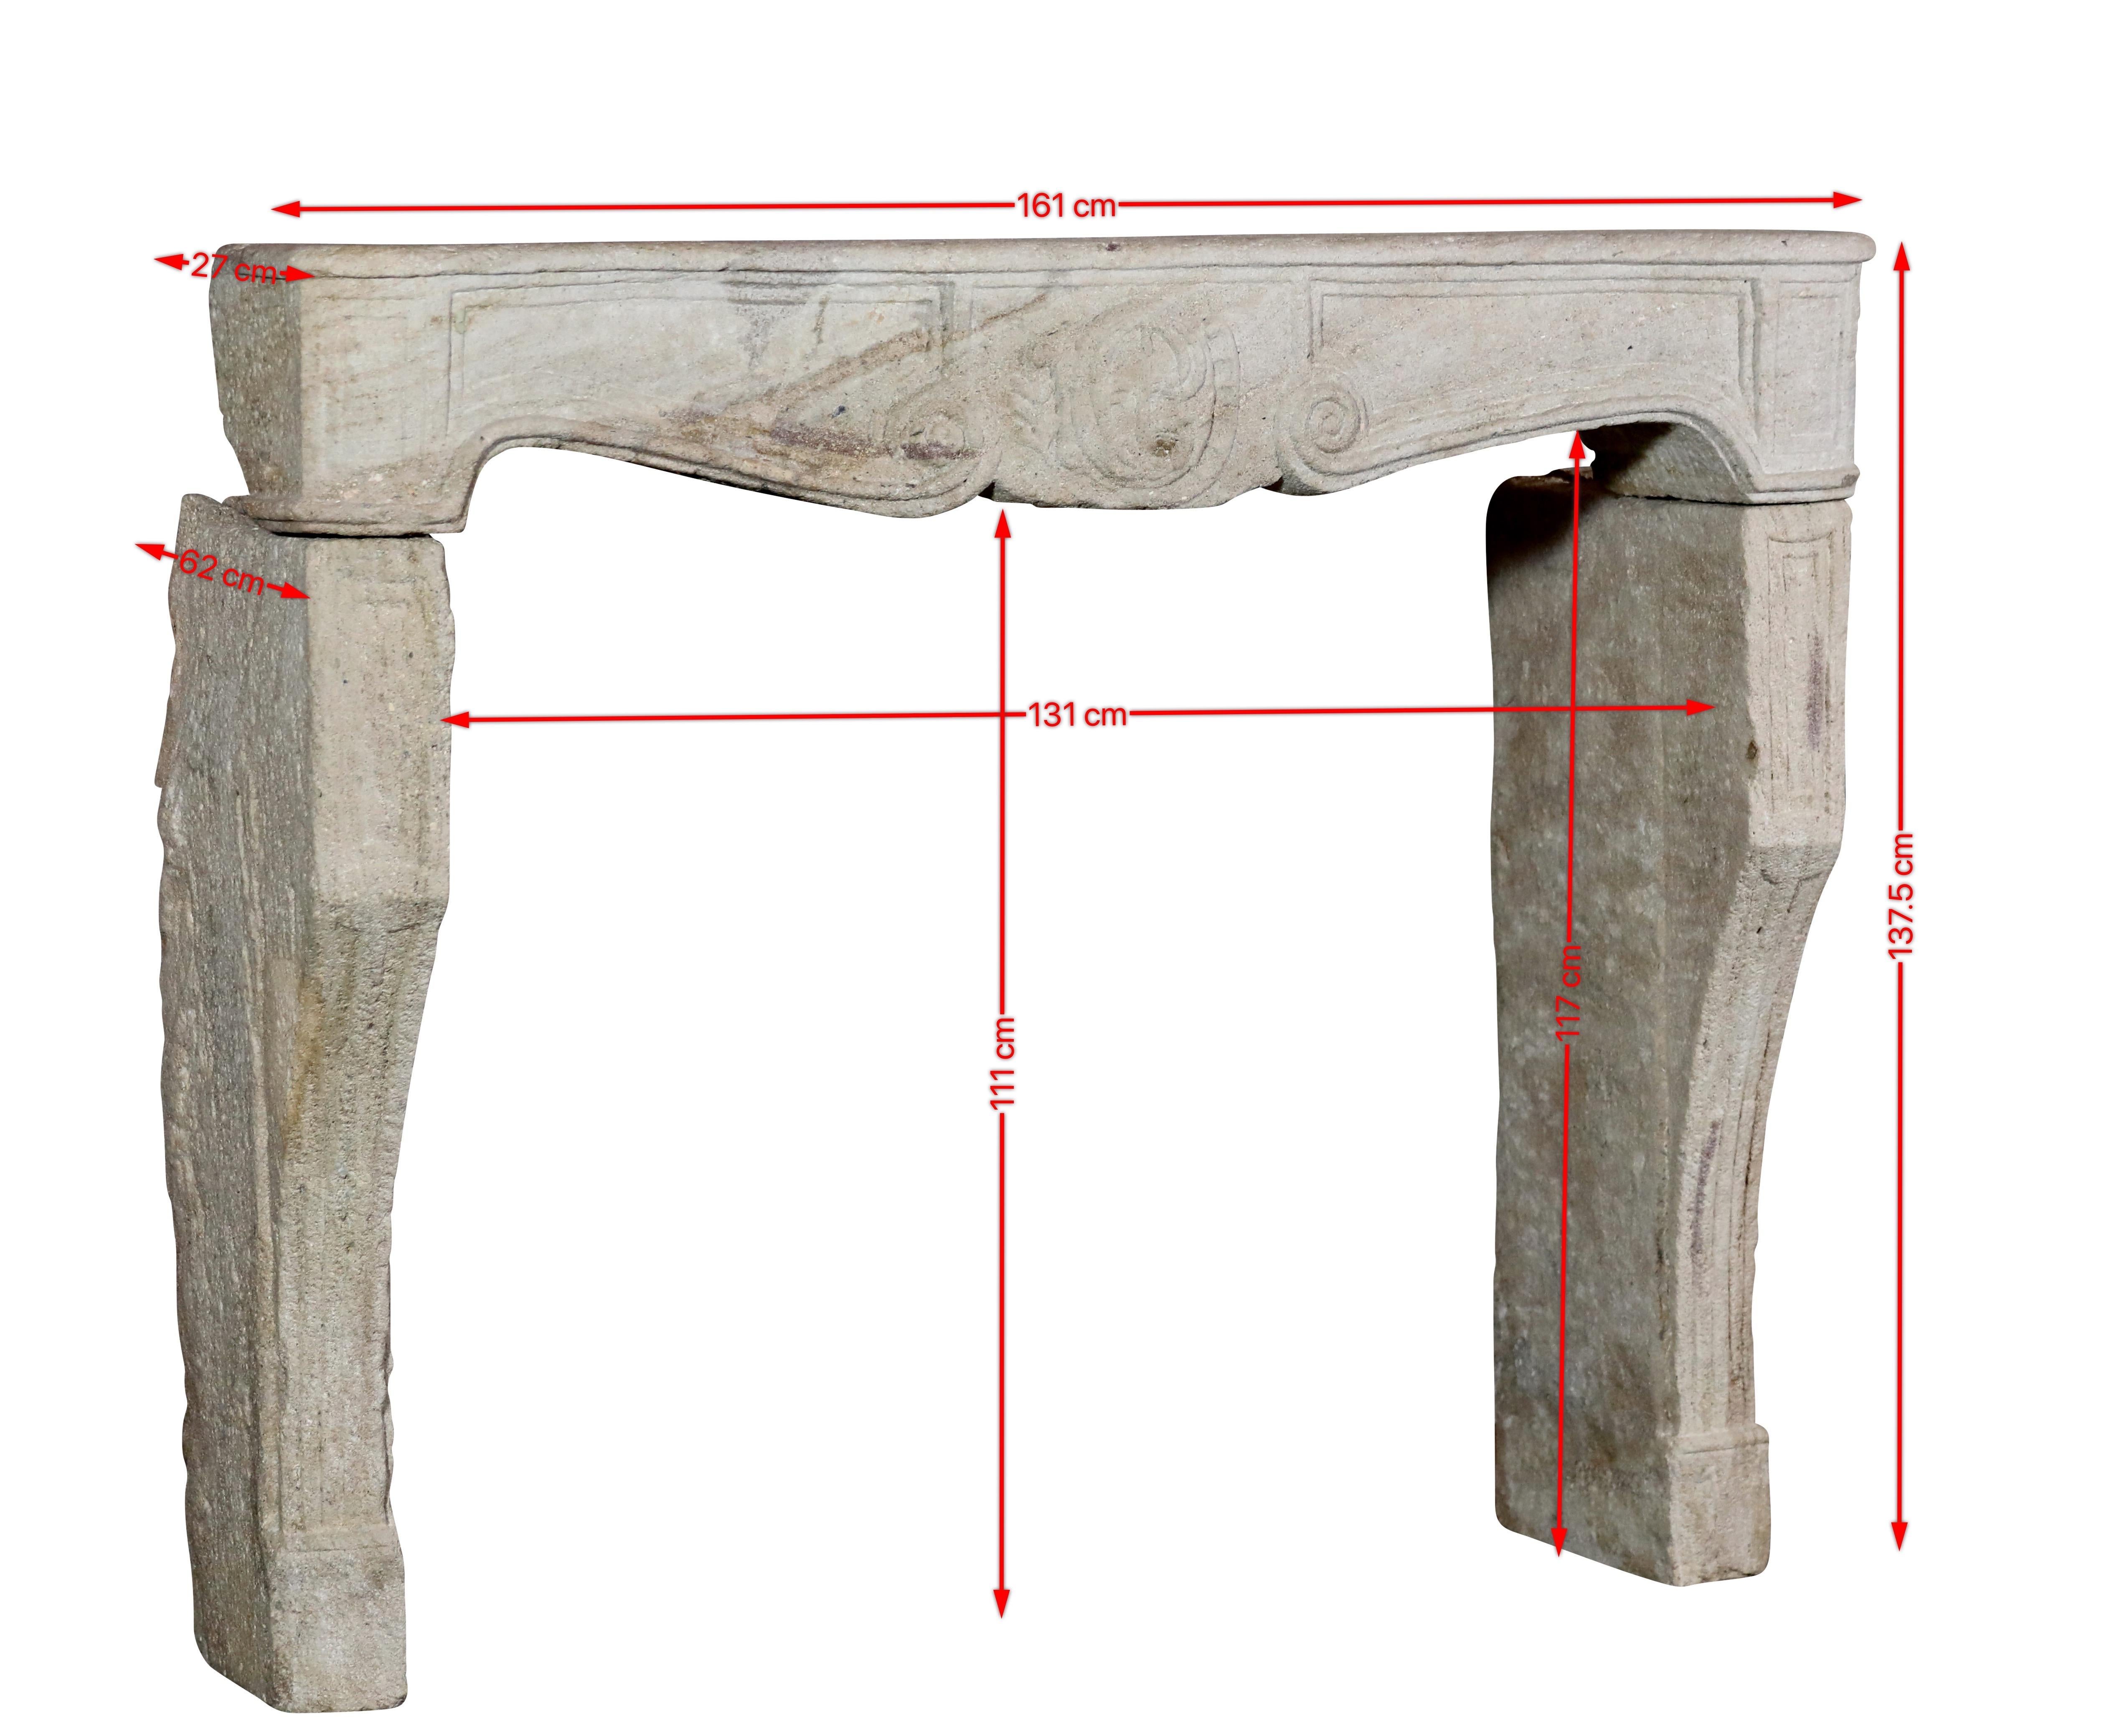 Rustic stone fireplace surround from the 17th Century.
The beige hard limestone brings instant French slow living feeling in the room.
Measurements:
161 cm Exterior Width 63,39 Inch
137,5 cm Exterior Height 53,94 Inch
131 cm Interior Width 51,57